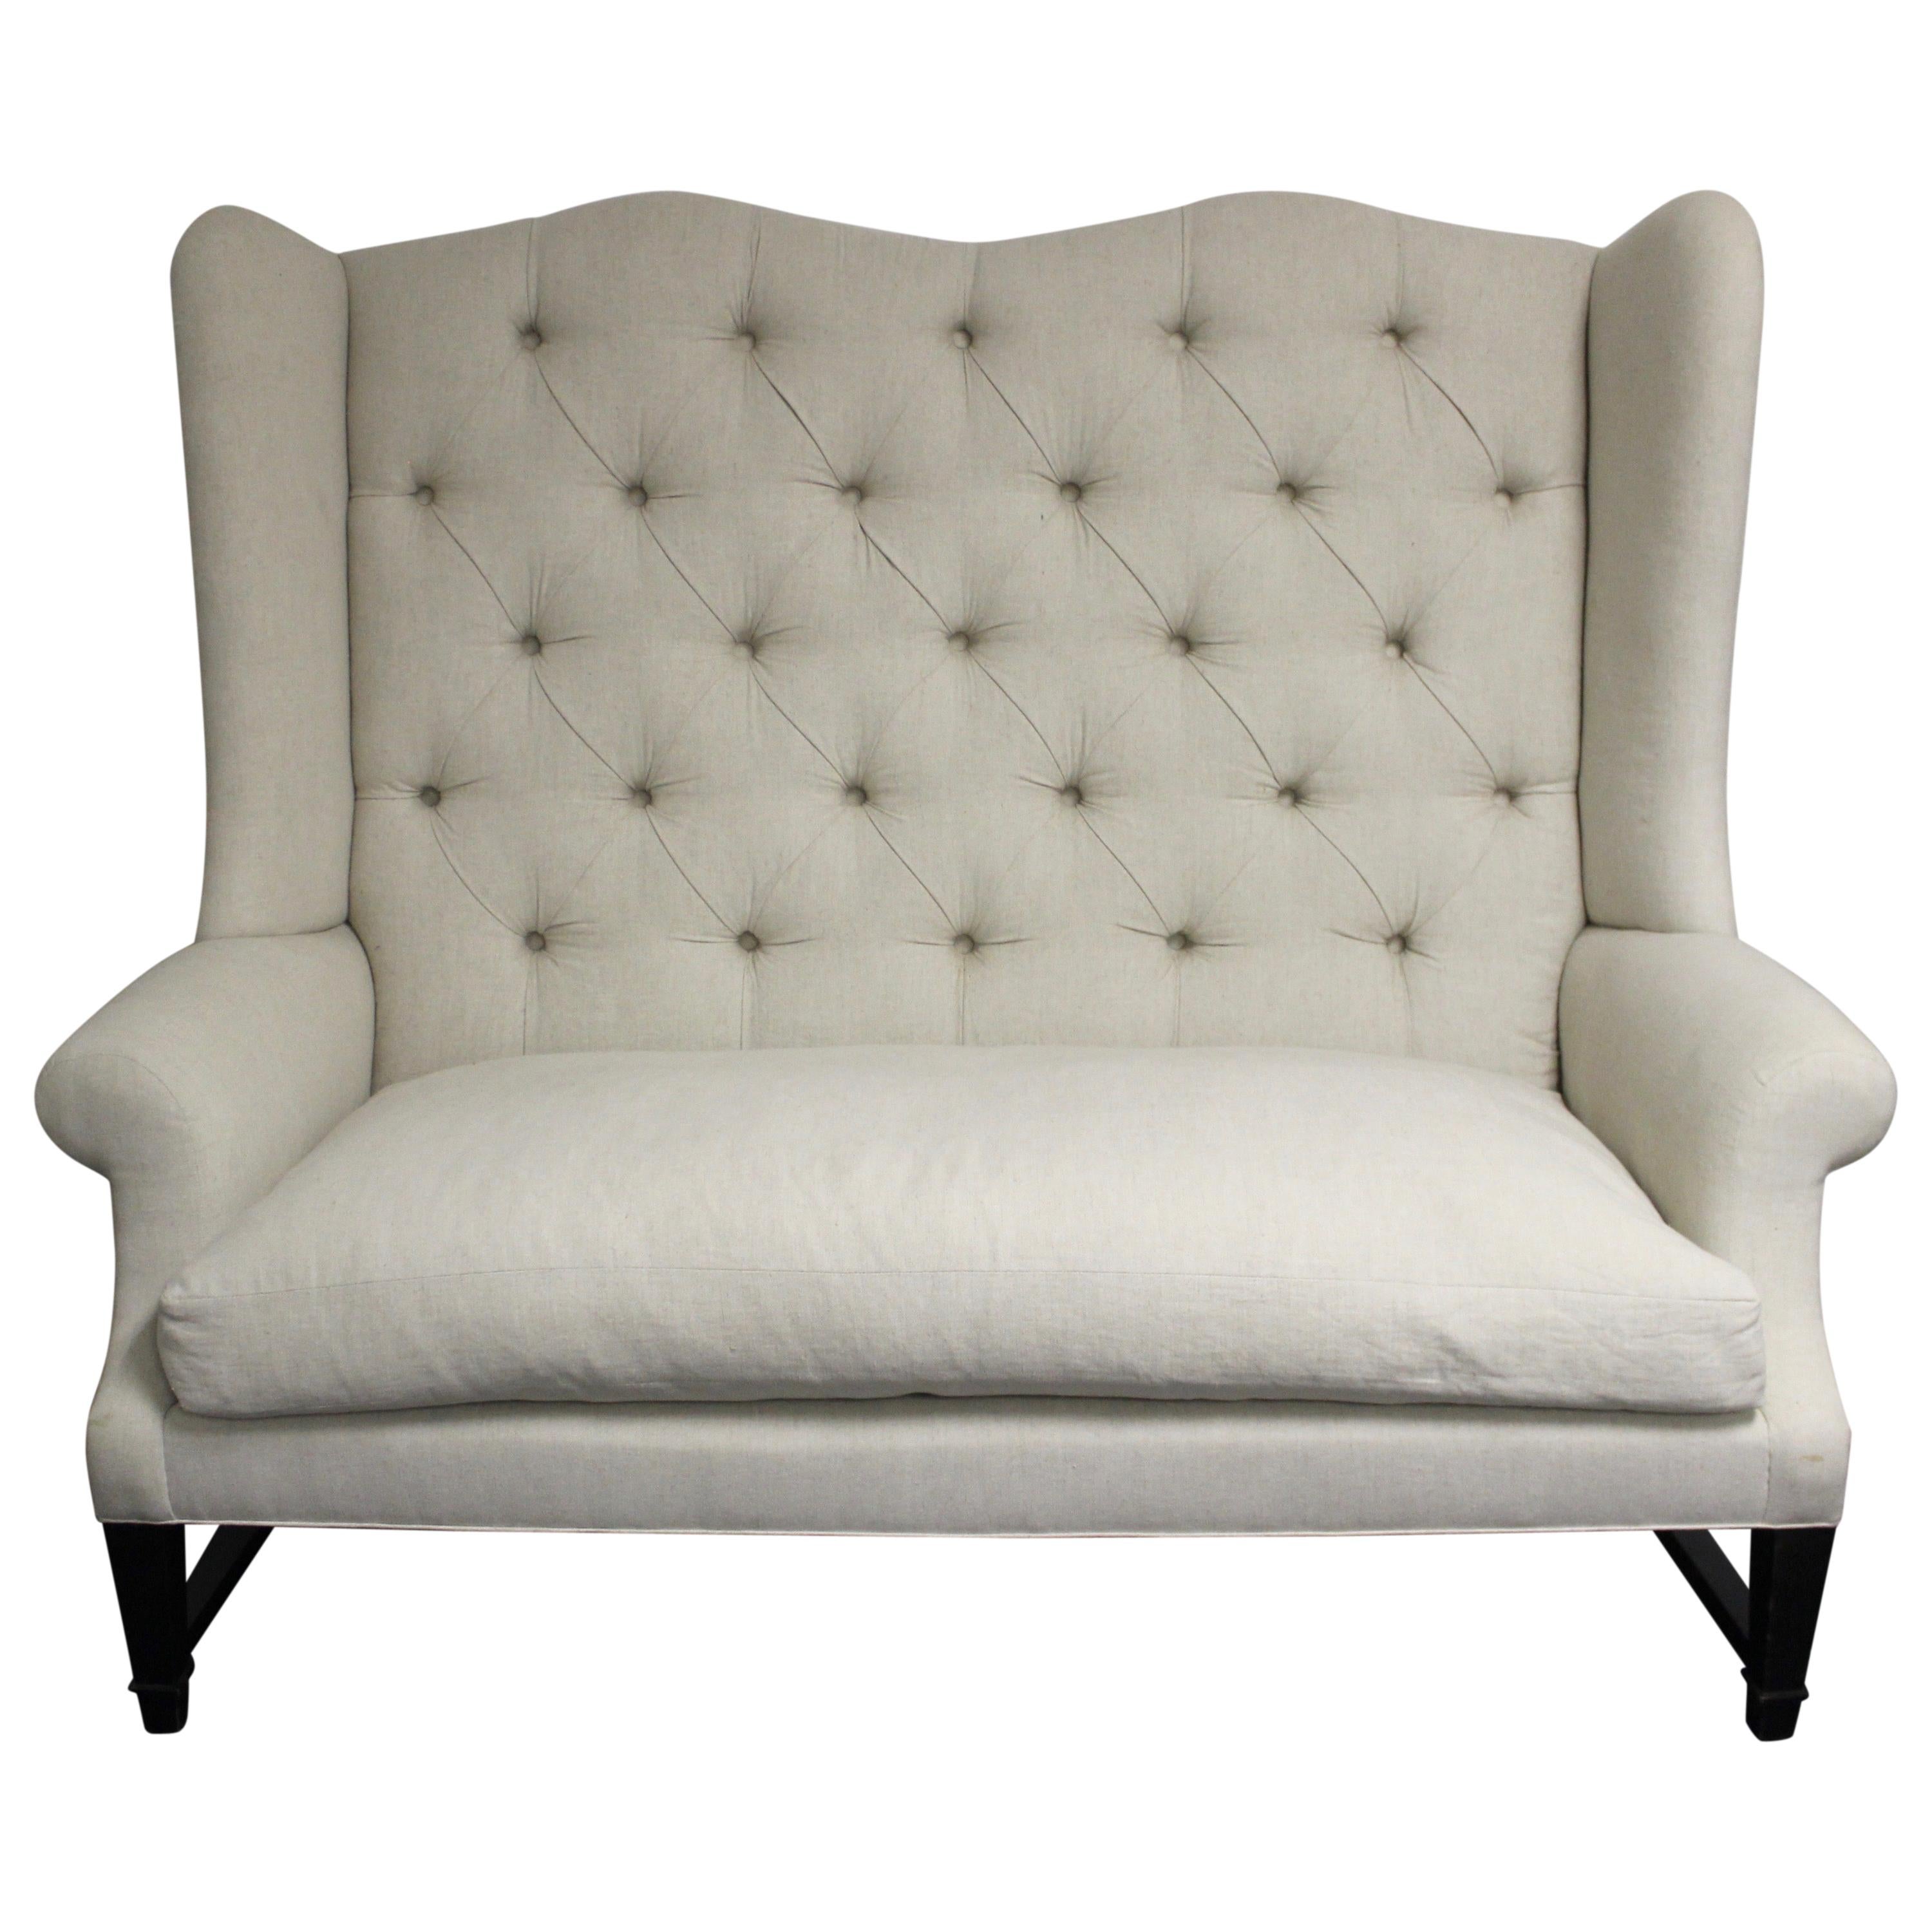 Tufted Wing Back Sofa